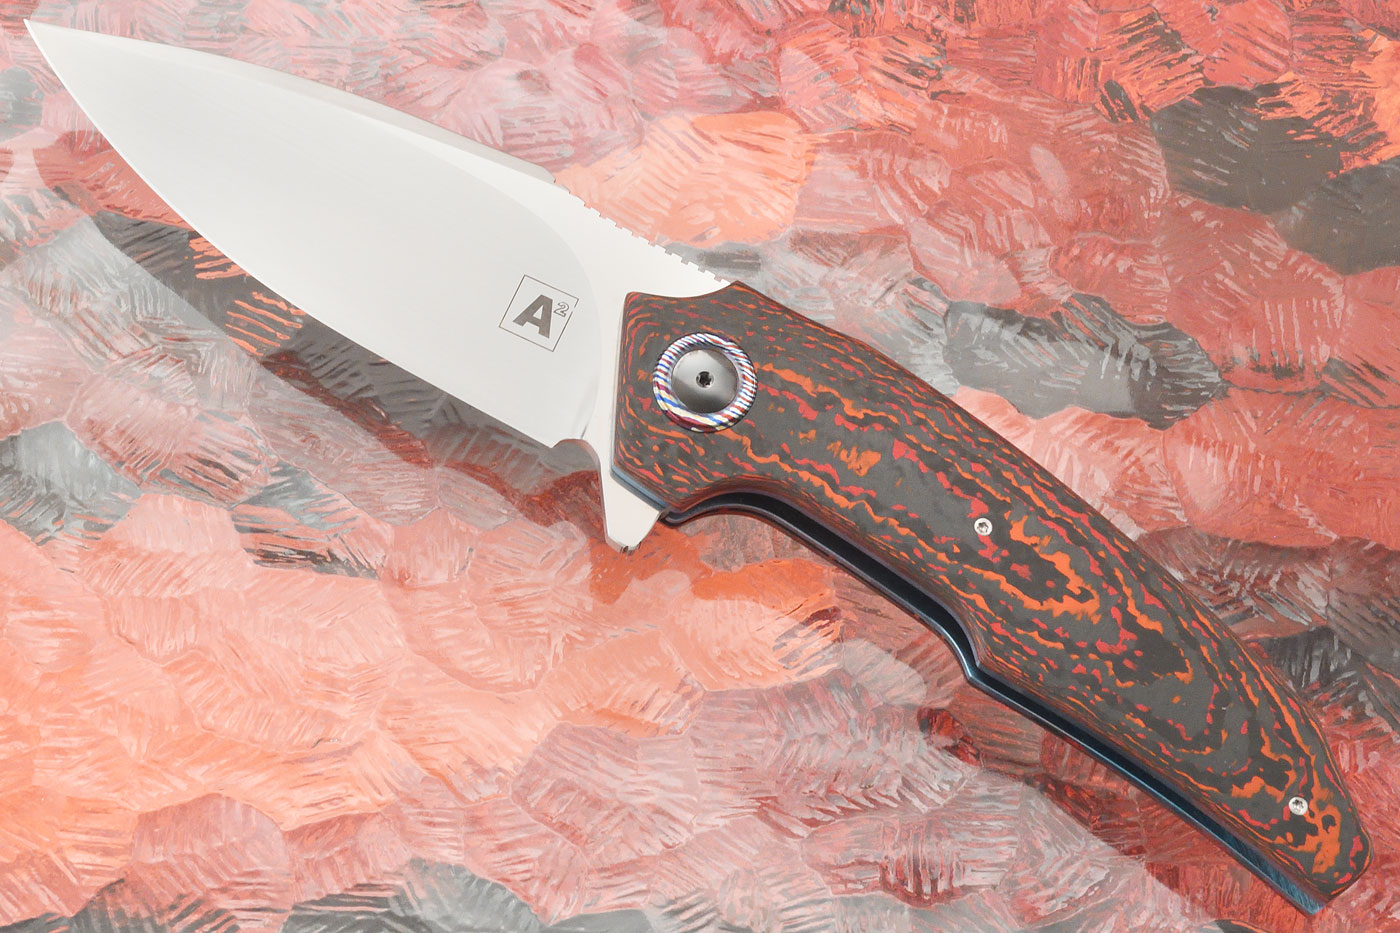 A6 Flipper with Lava Flow FatCarbon, Timascus, and Zirconium (Ceramic IKBS) - CTS-XHP